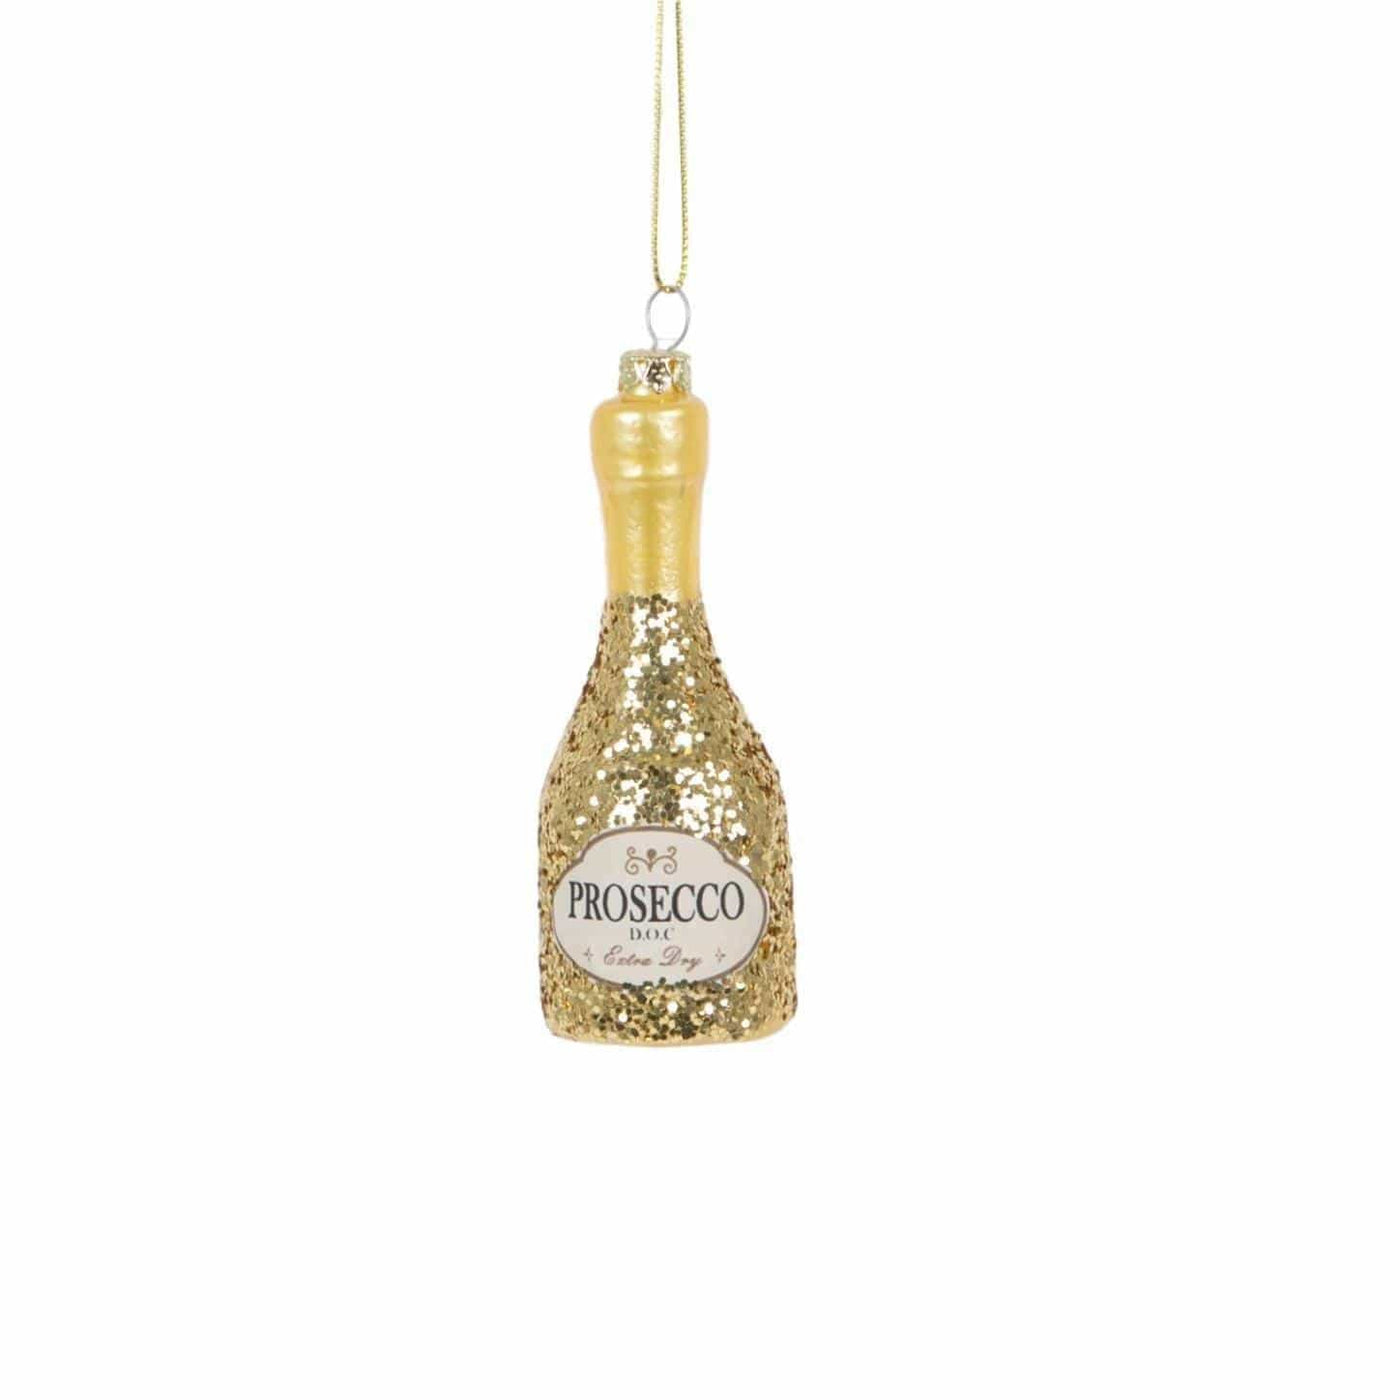 Sass & Belle Christmas Christmas Decorations Novelty Gold Prosecco Bottle Christmas Bauble